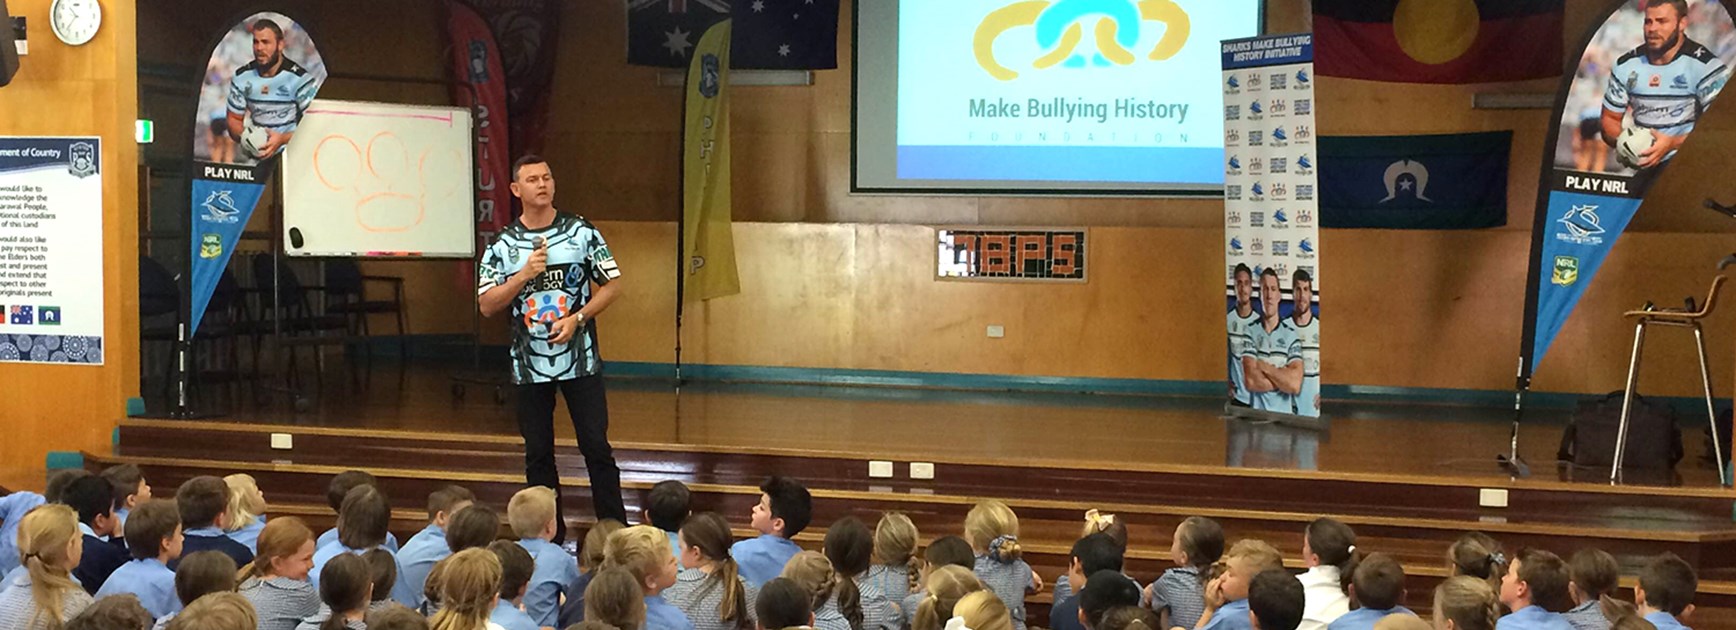 Sharks continue efforts to ‘Make Bullying History’